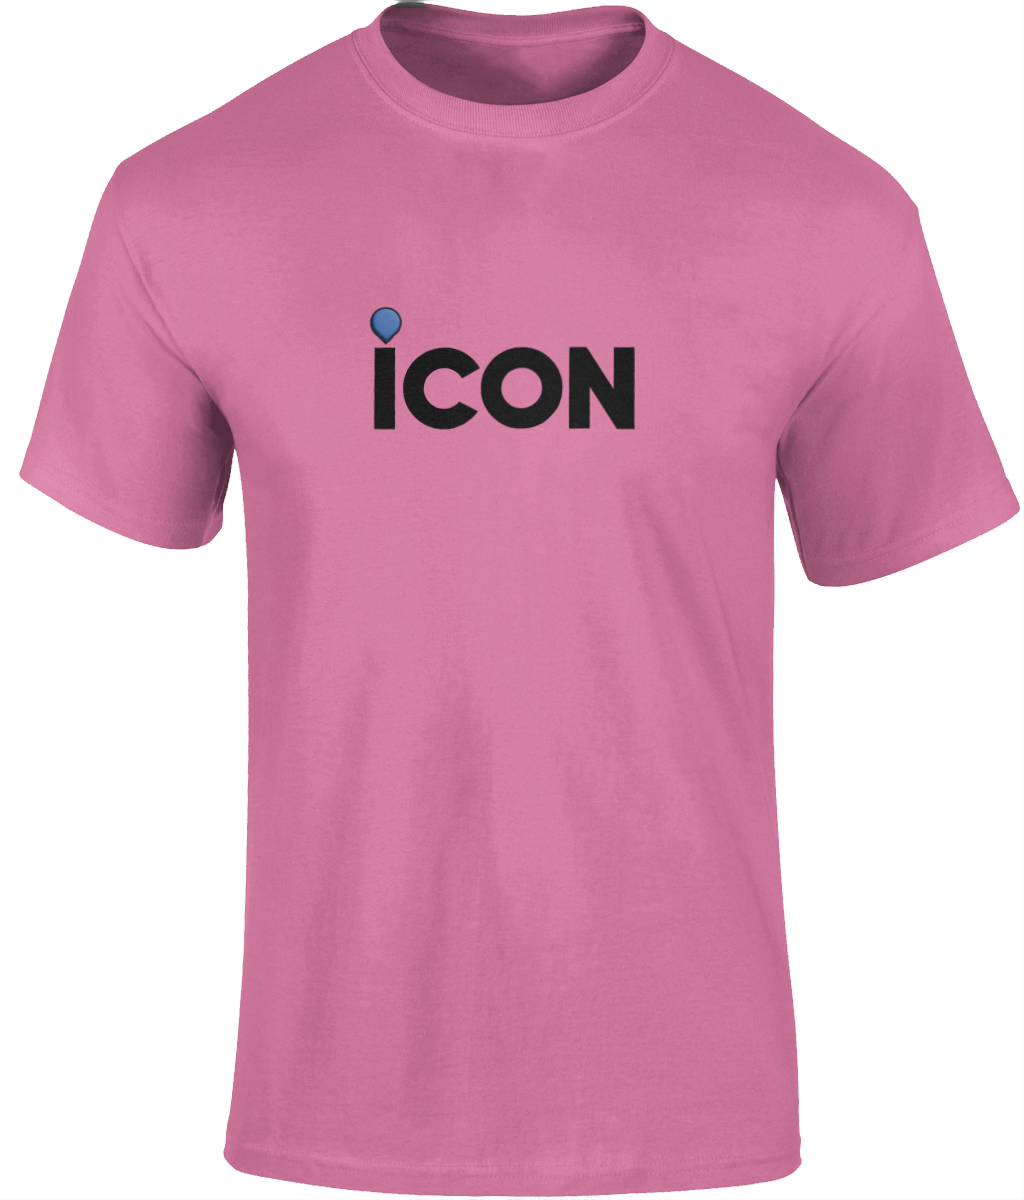 ICON Ultra Cotton Adult T-Shirt